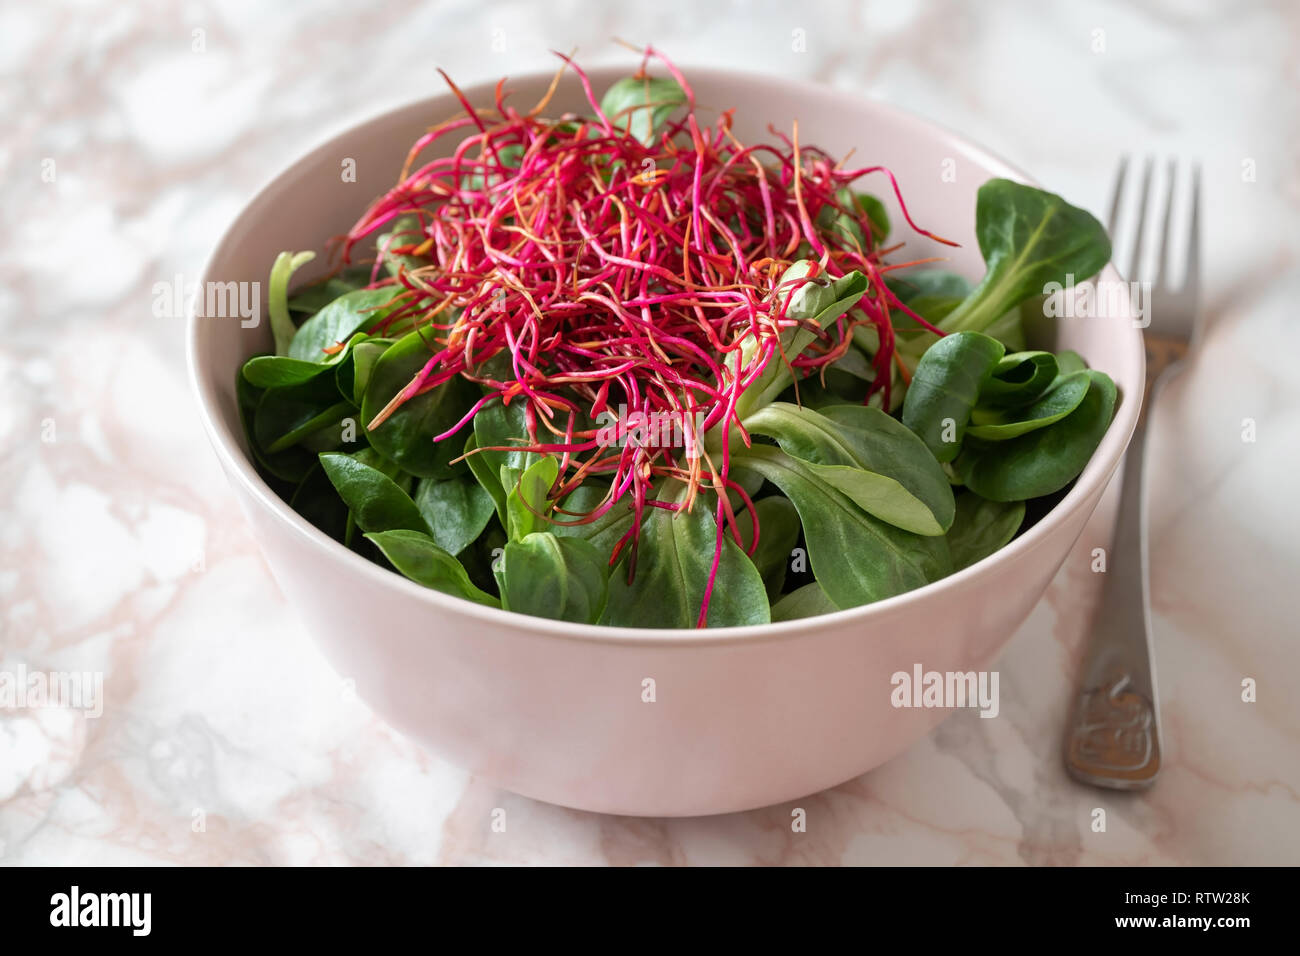 Salad with lamb's lettuce and fresh red beet sprouts Stock Photo